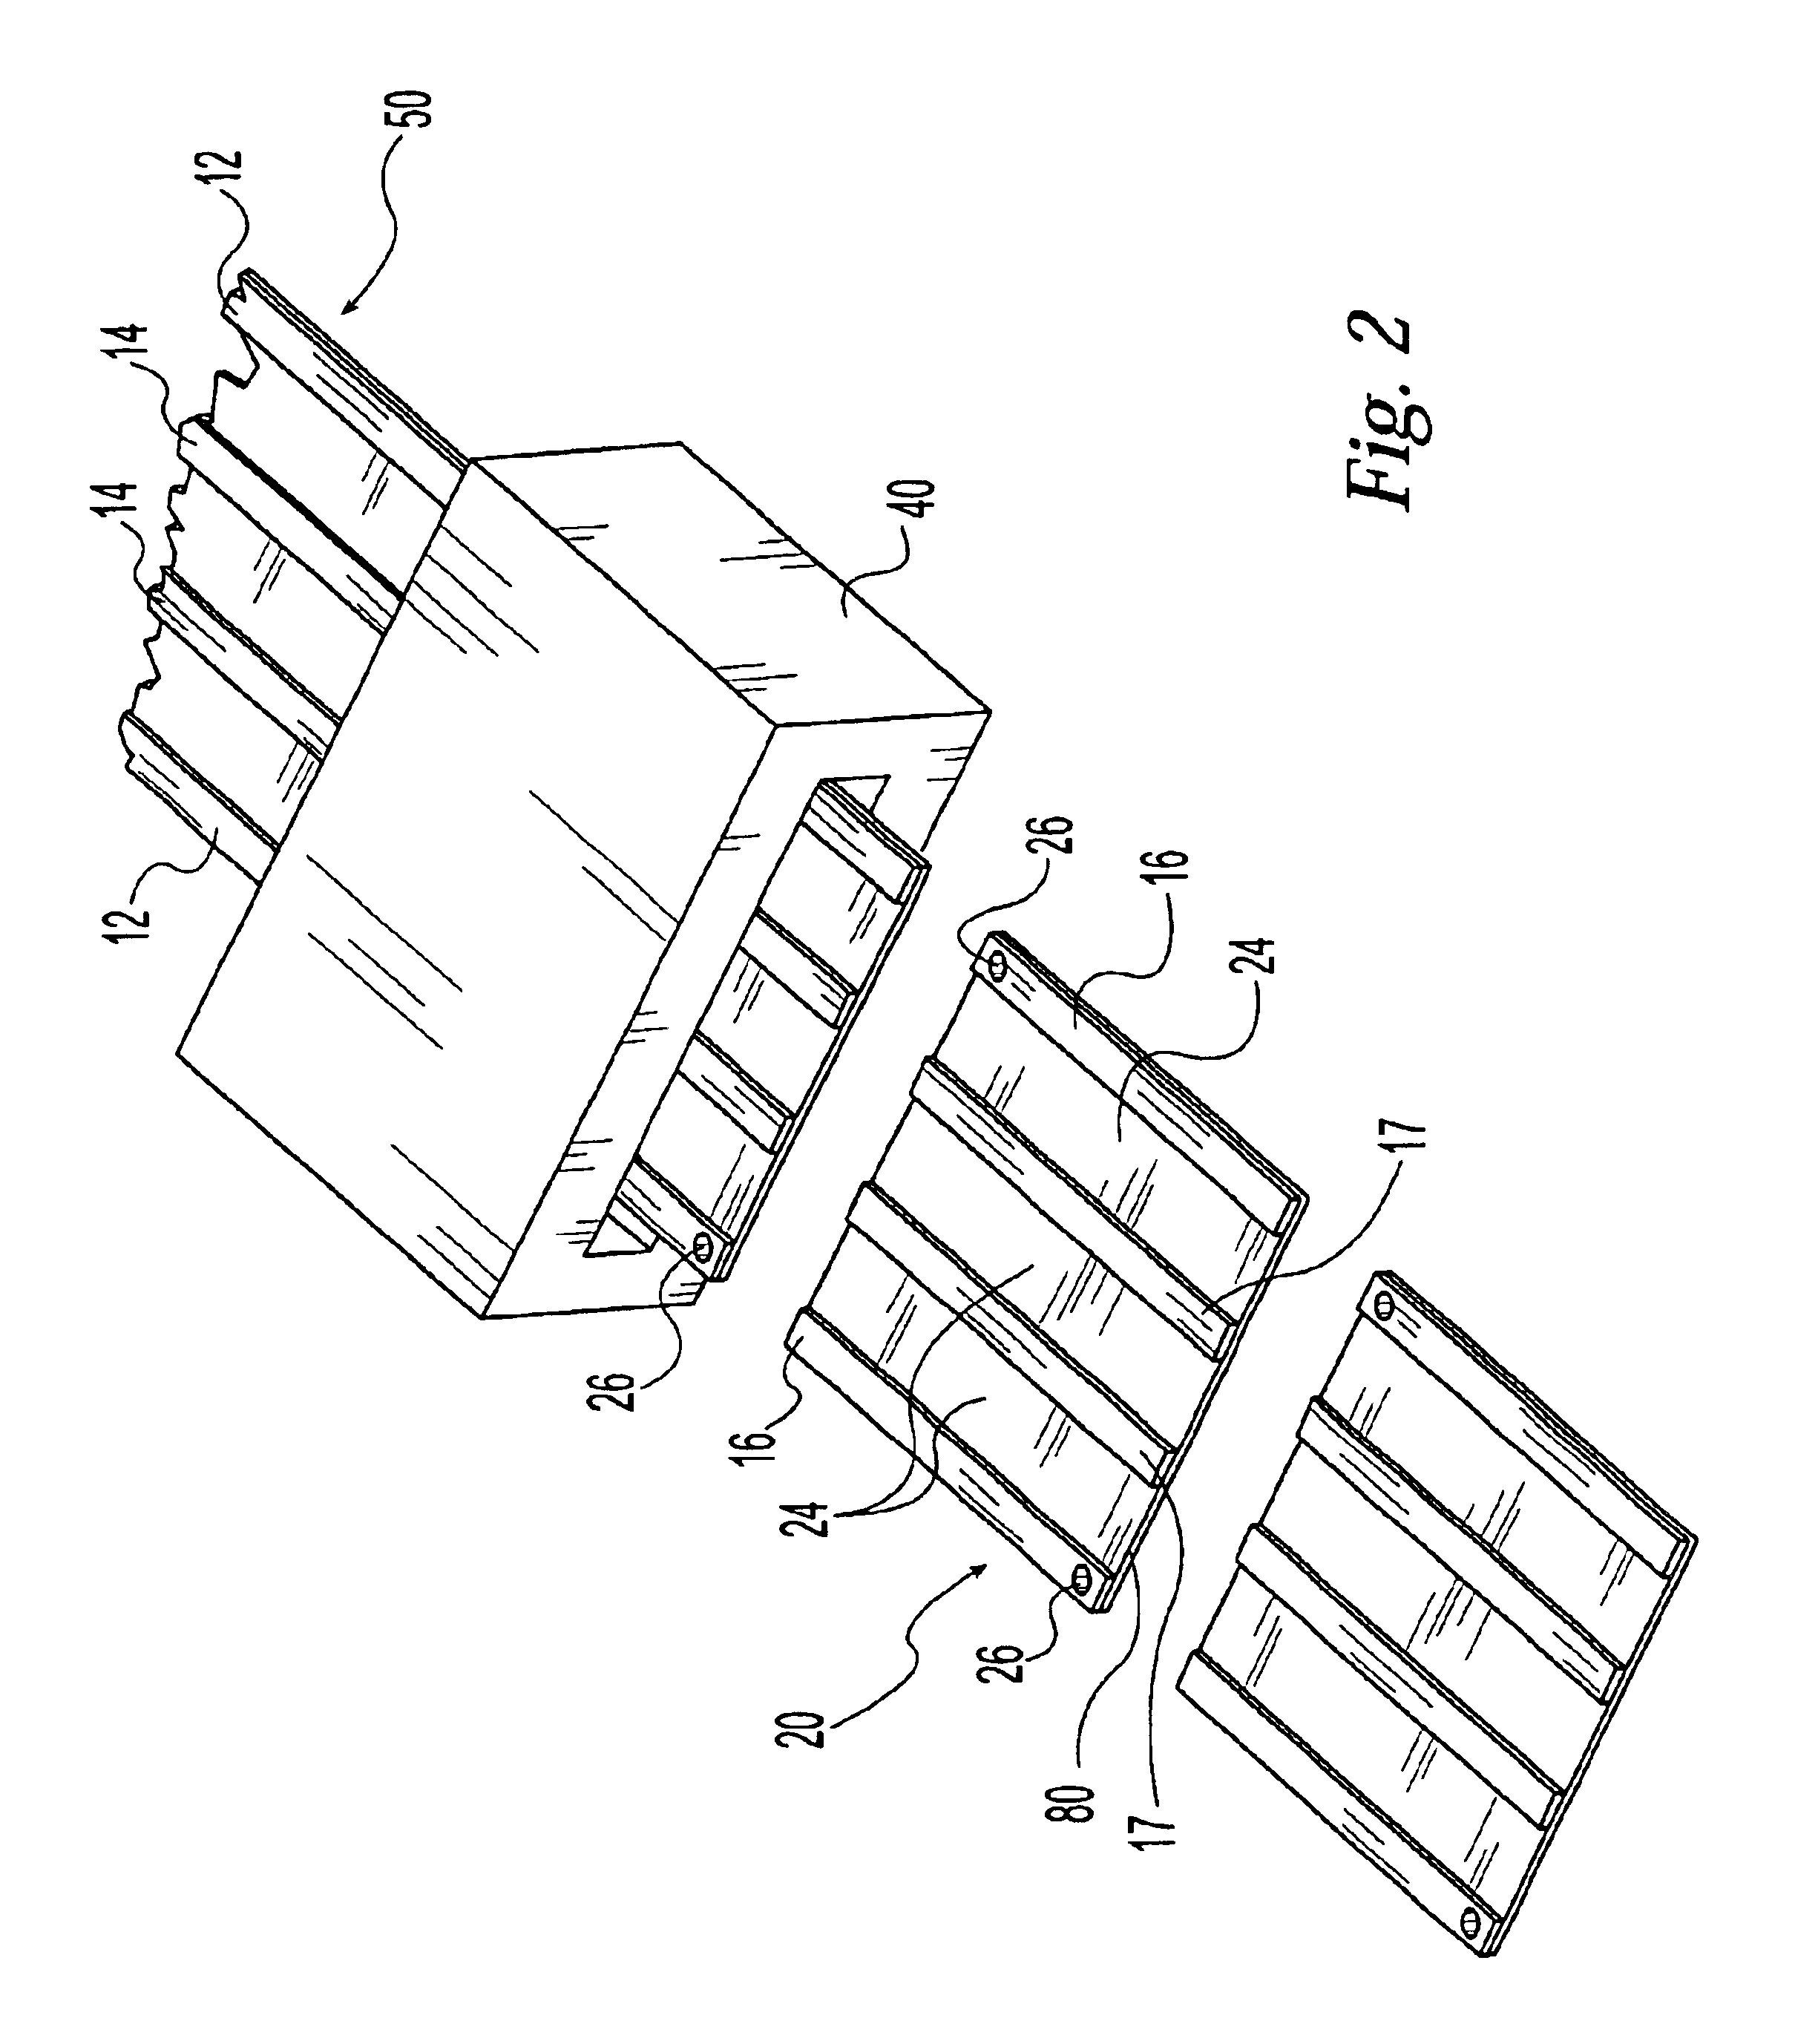 Method of fabricating multi-channel devices and multi-channel devices therefrom